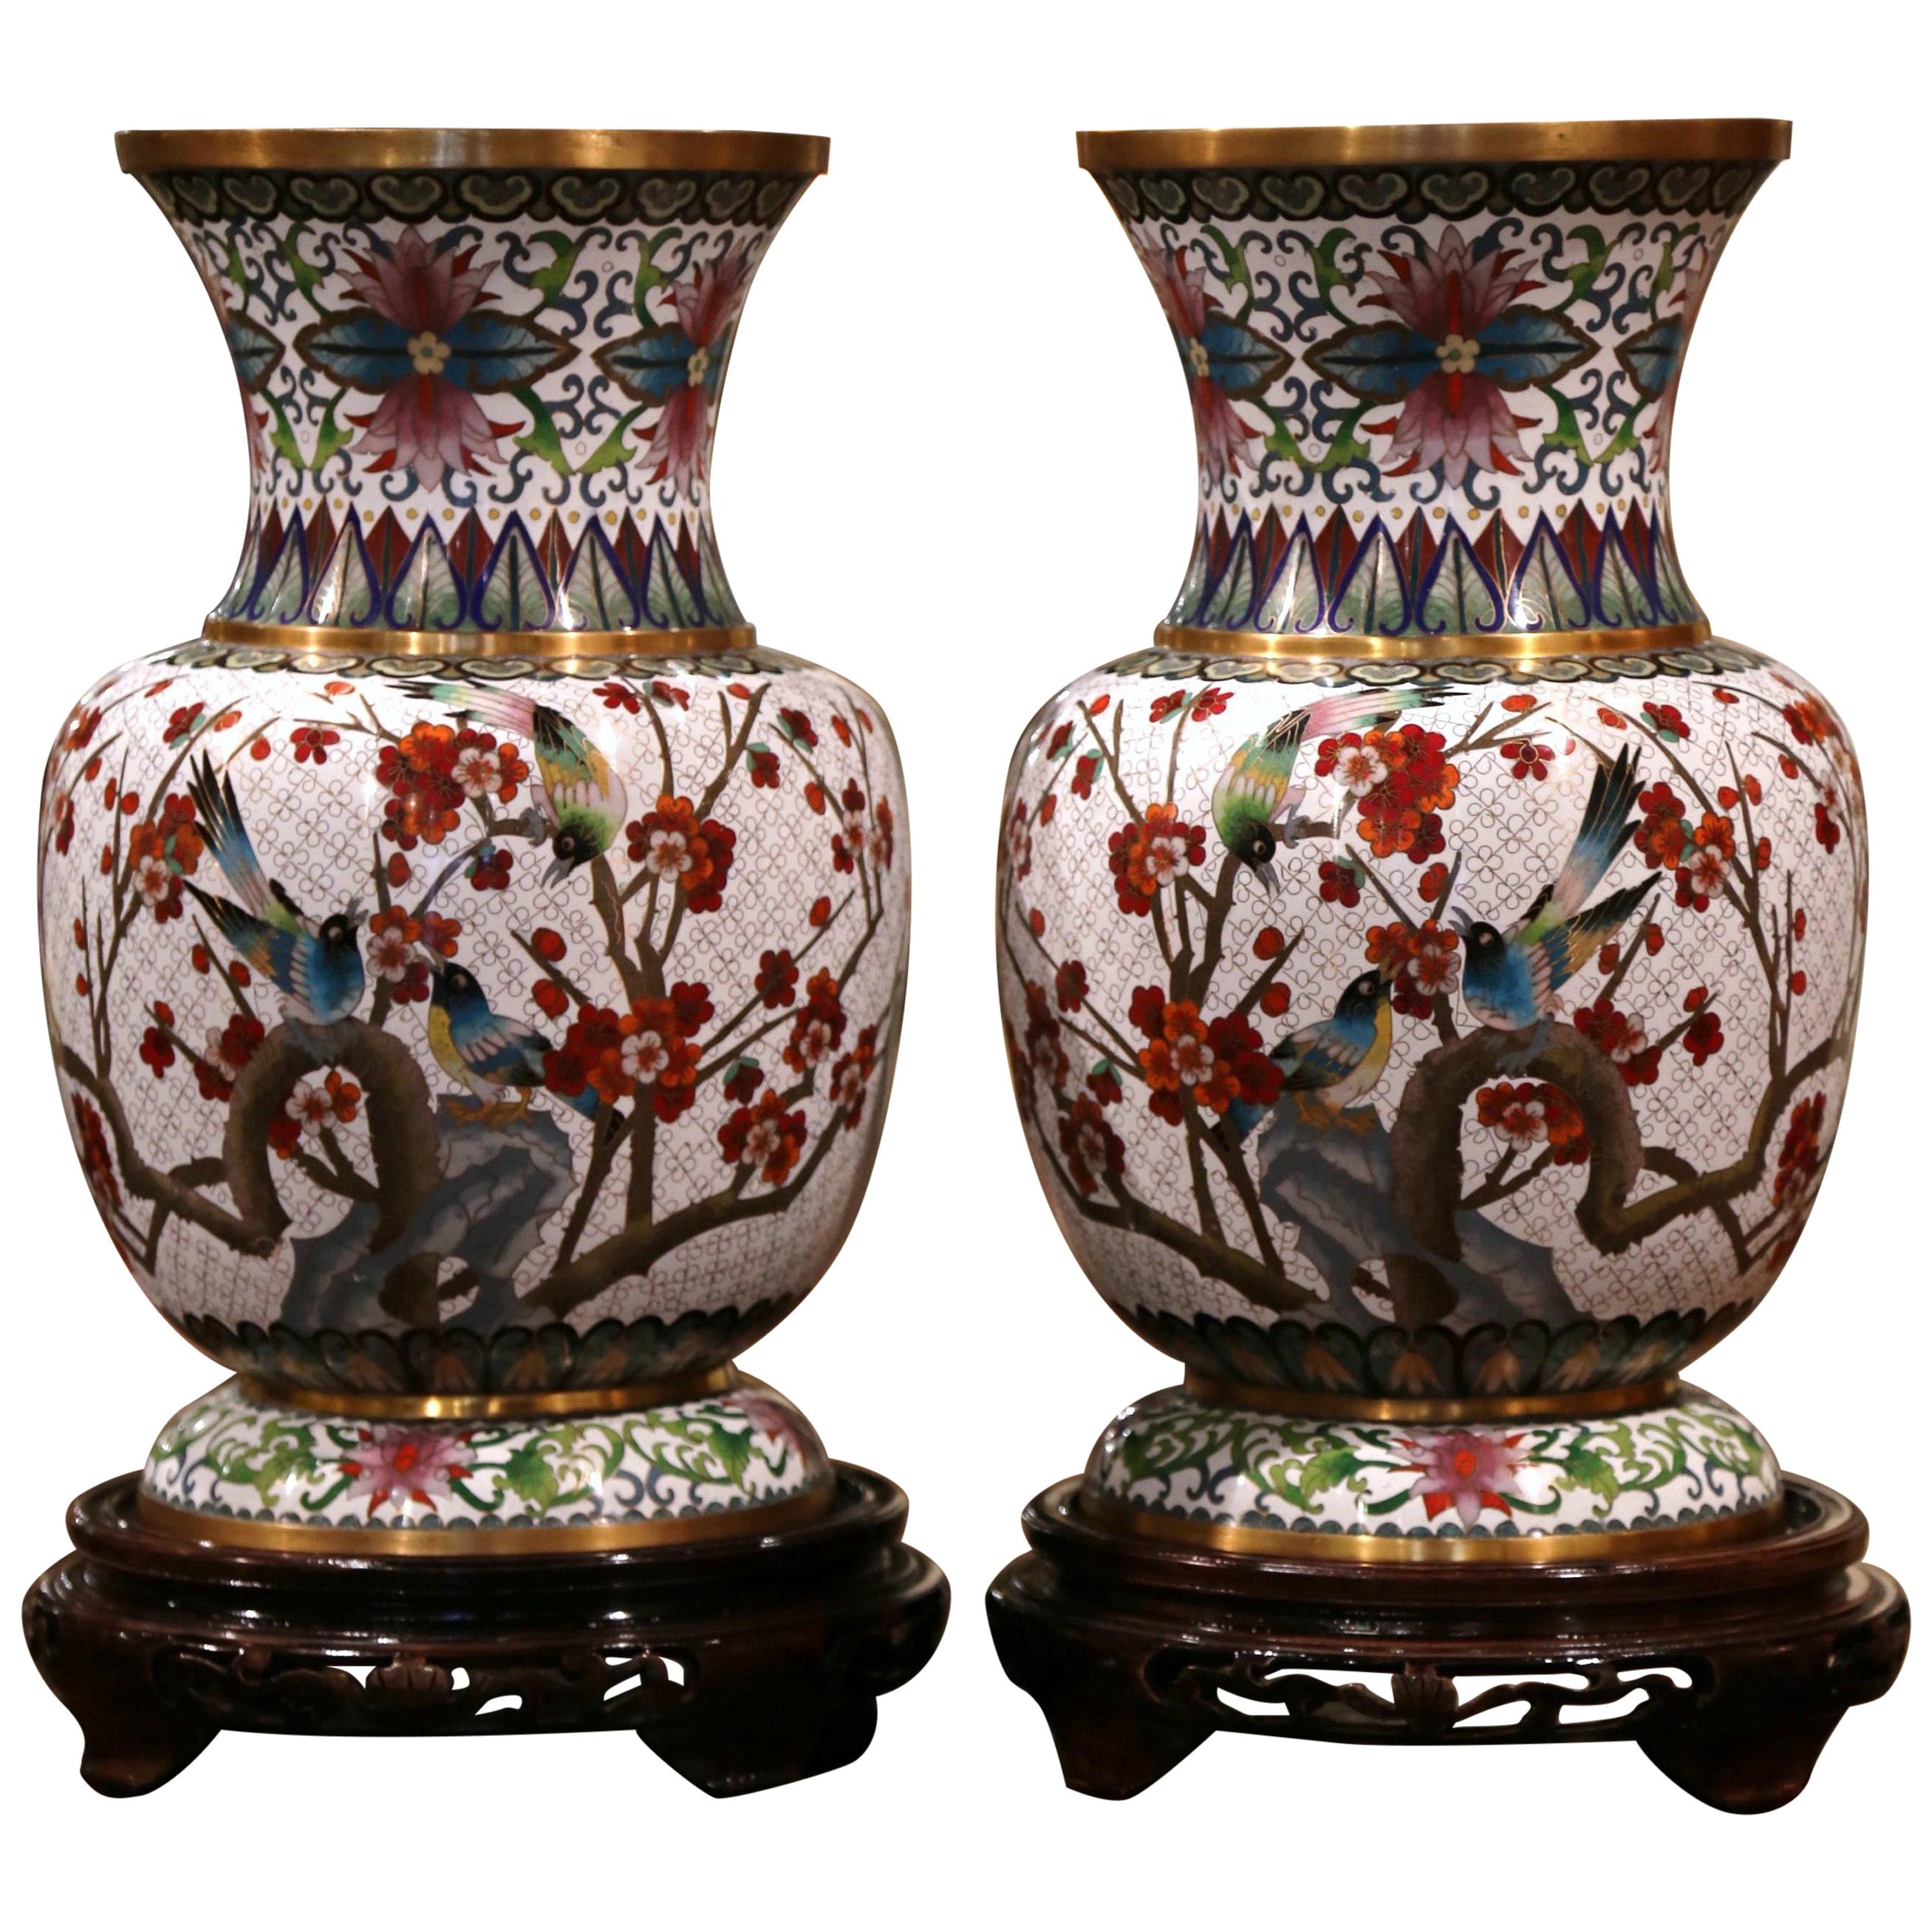 Pair of 20th Century Chinese Cloisonné Enamel Vases on Stand with Bird Decor